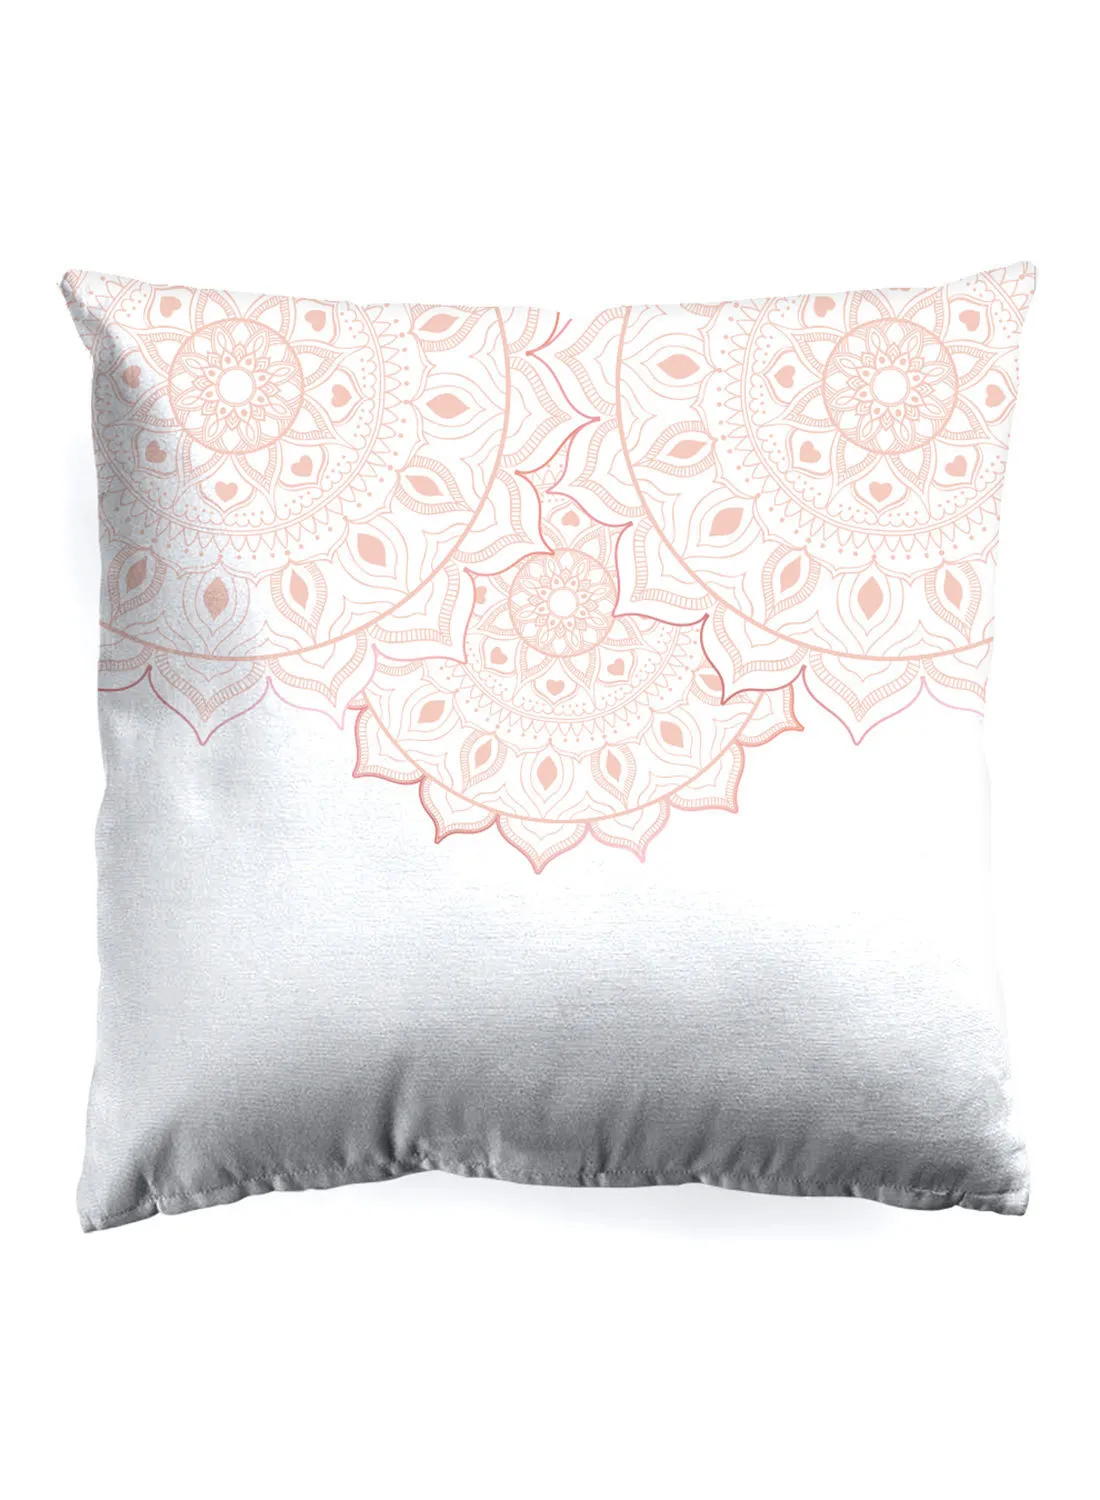 noon east Decorative Cushion , Size 45X45 Cm Scroll - 100% Cotton Cover Microfiber Infill Bedroom Or Living Room Decoration